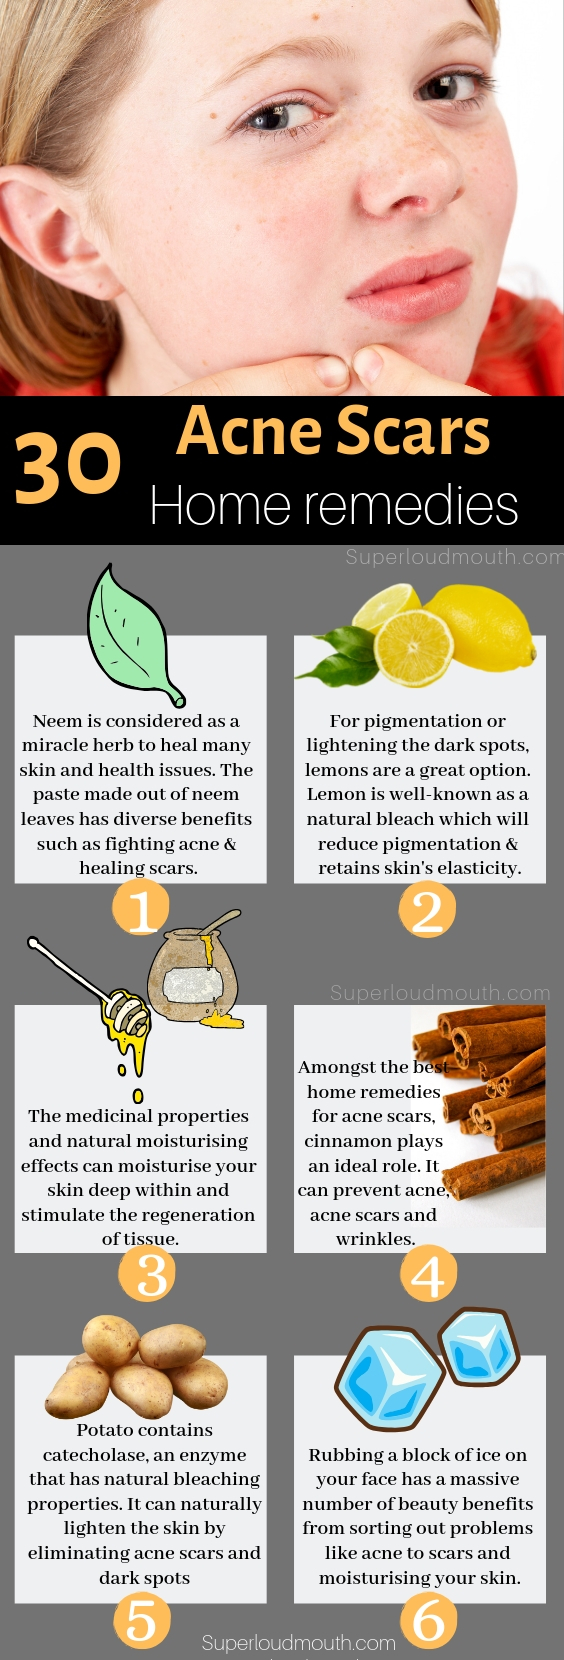 30 Natural Home Remedies to heal Acne Scars overnight